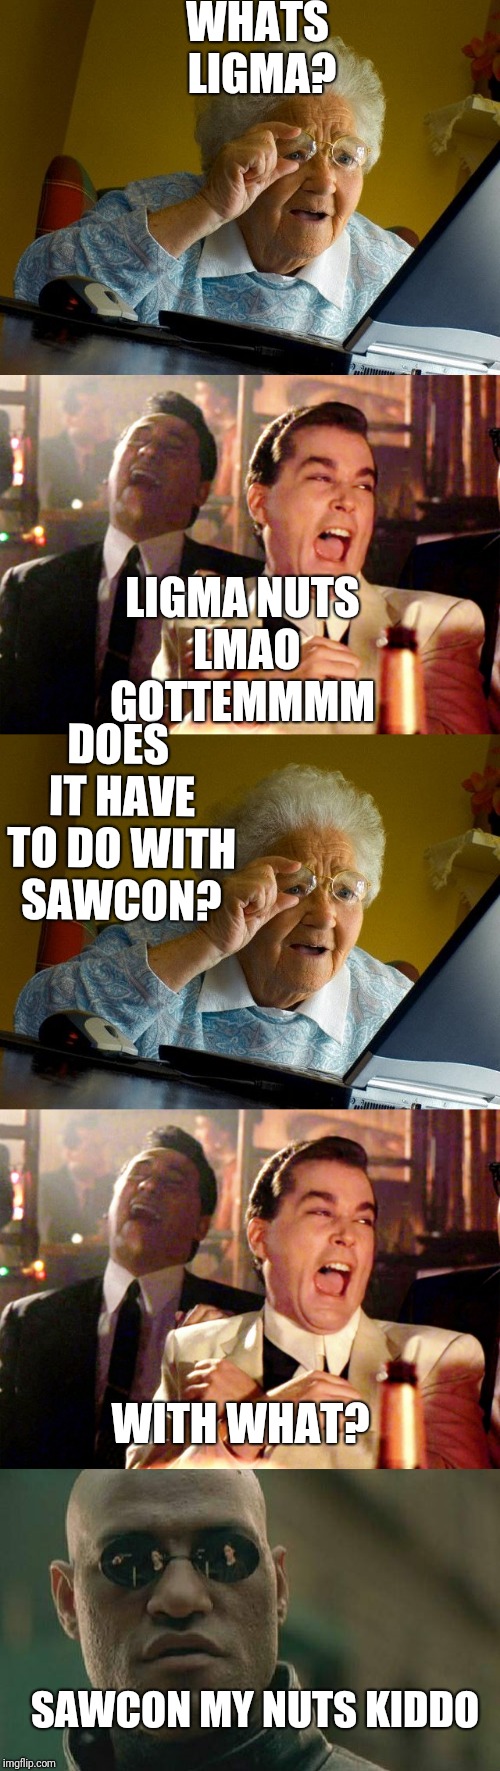 I spent so long moving text boxes on my little phone making this meme so please atleast comment what you think about it :D | WHATS LIGMA? LIGMA NUTS LMAO GOTTEMMMM; DOES IT HAVE TO DO WITH SAWCON? WITH WHAT? SAWCON MY NUTS KIDDO | image tagged in funny,meme,ligma/sawcon | made w/ Imgflip meme maker